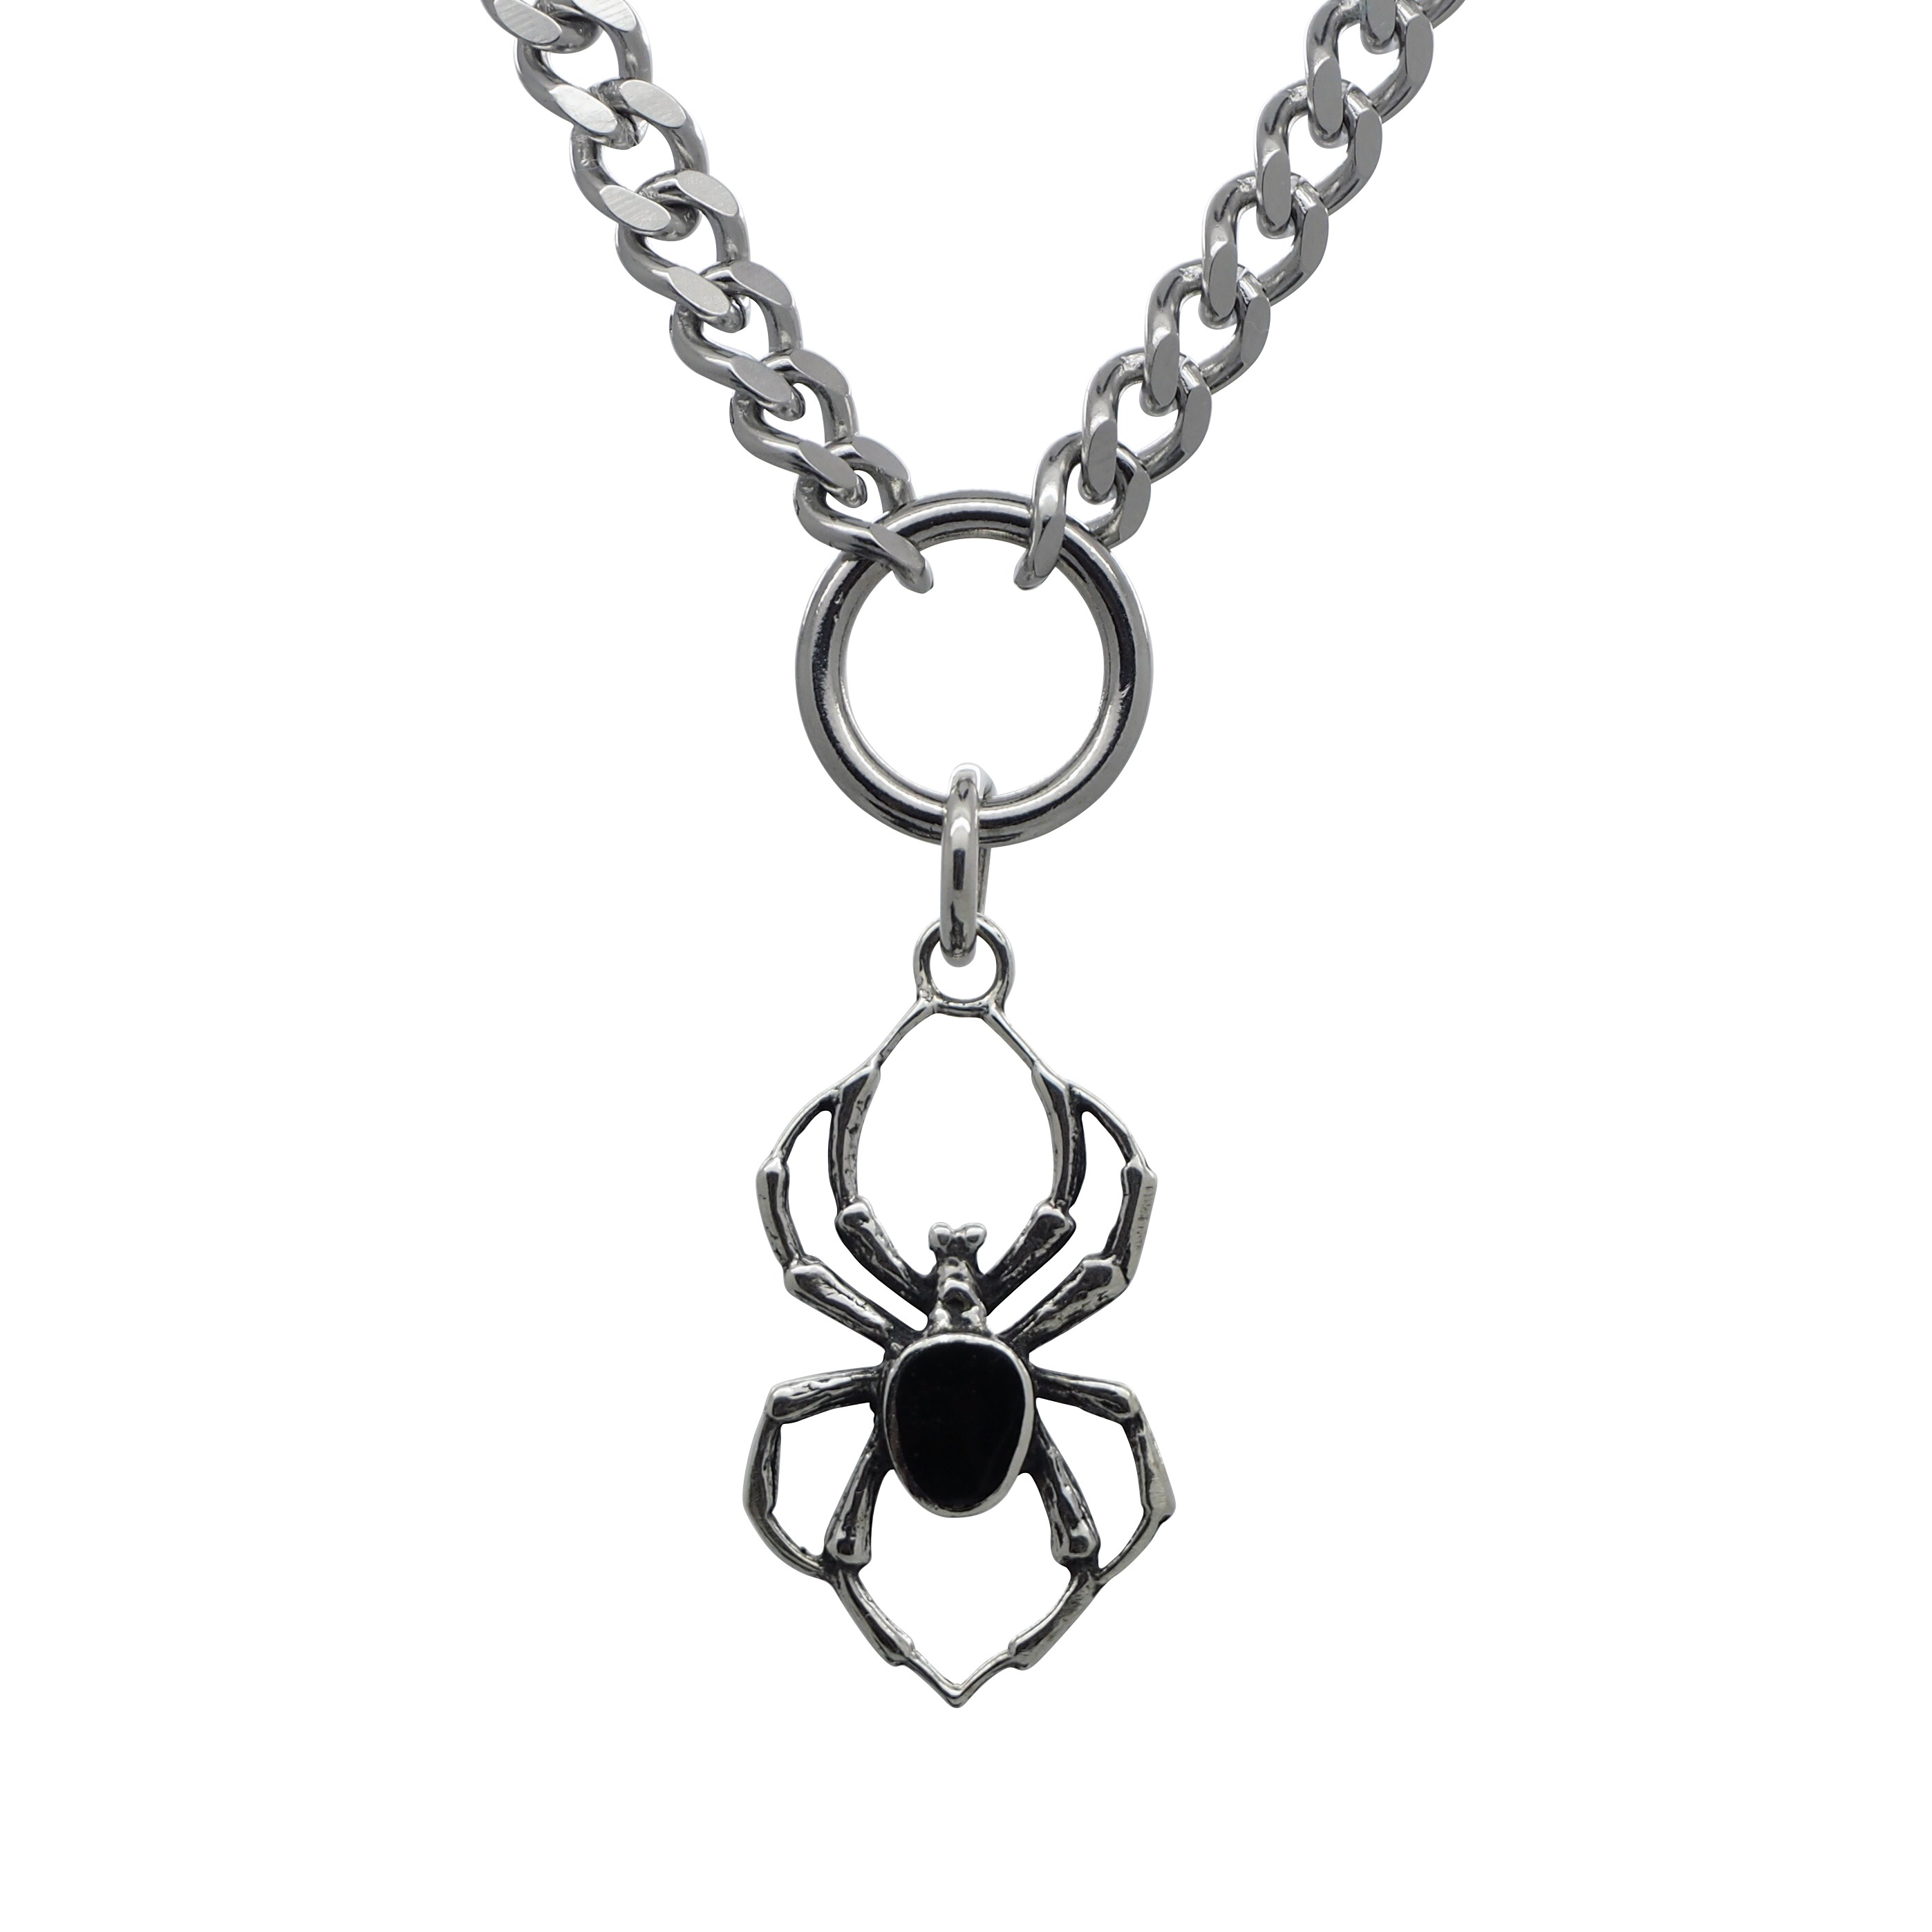 BLACK WIDOW SPIDER Pendant On 925 Sterling Silver 20